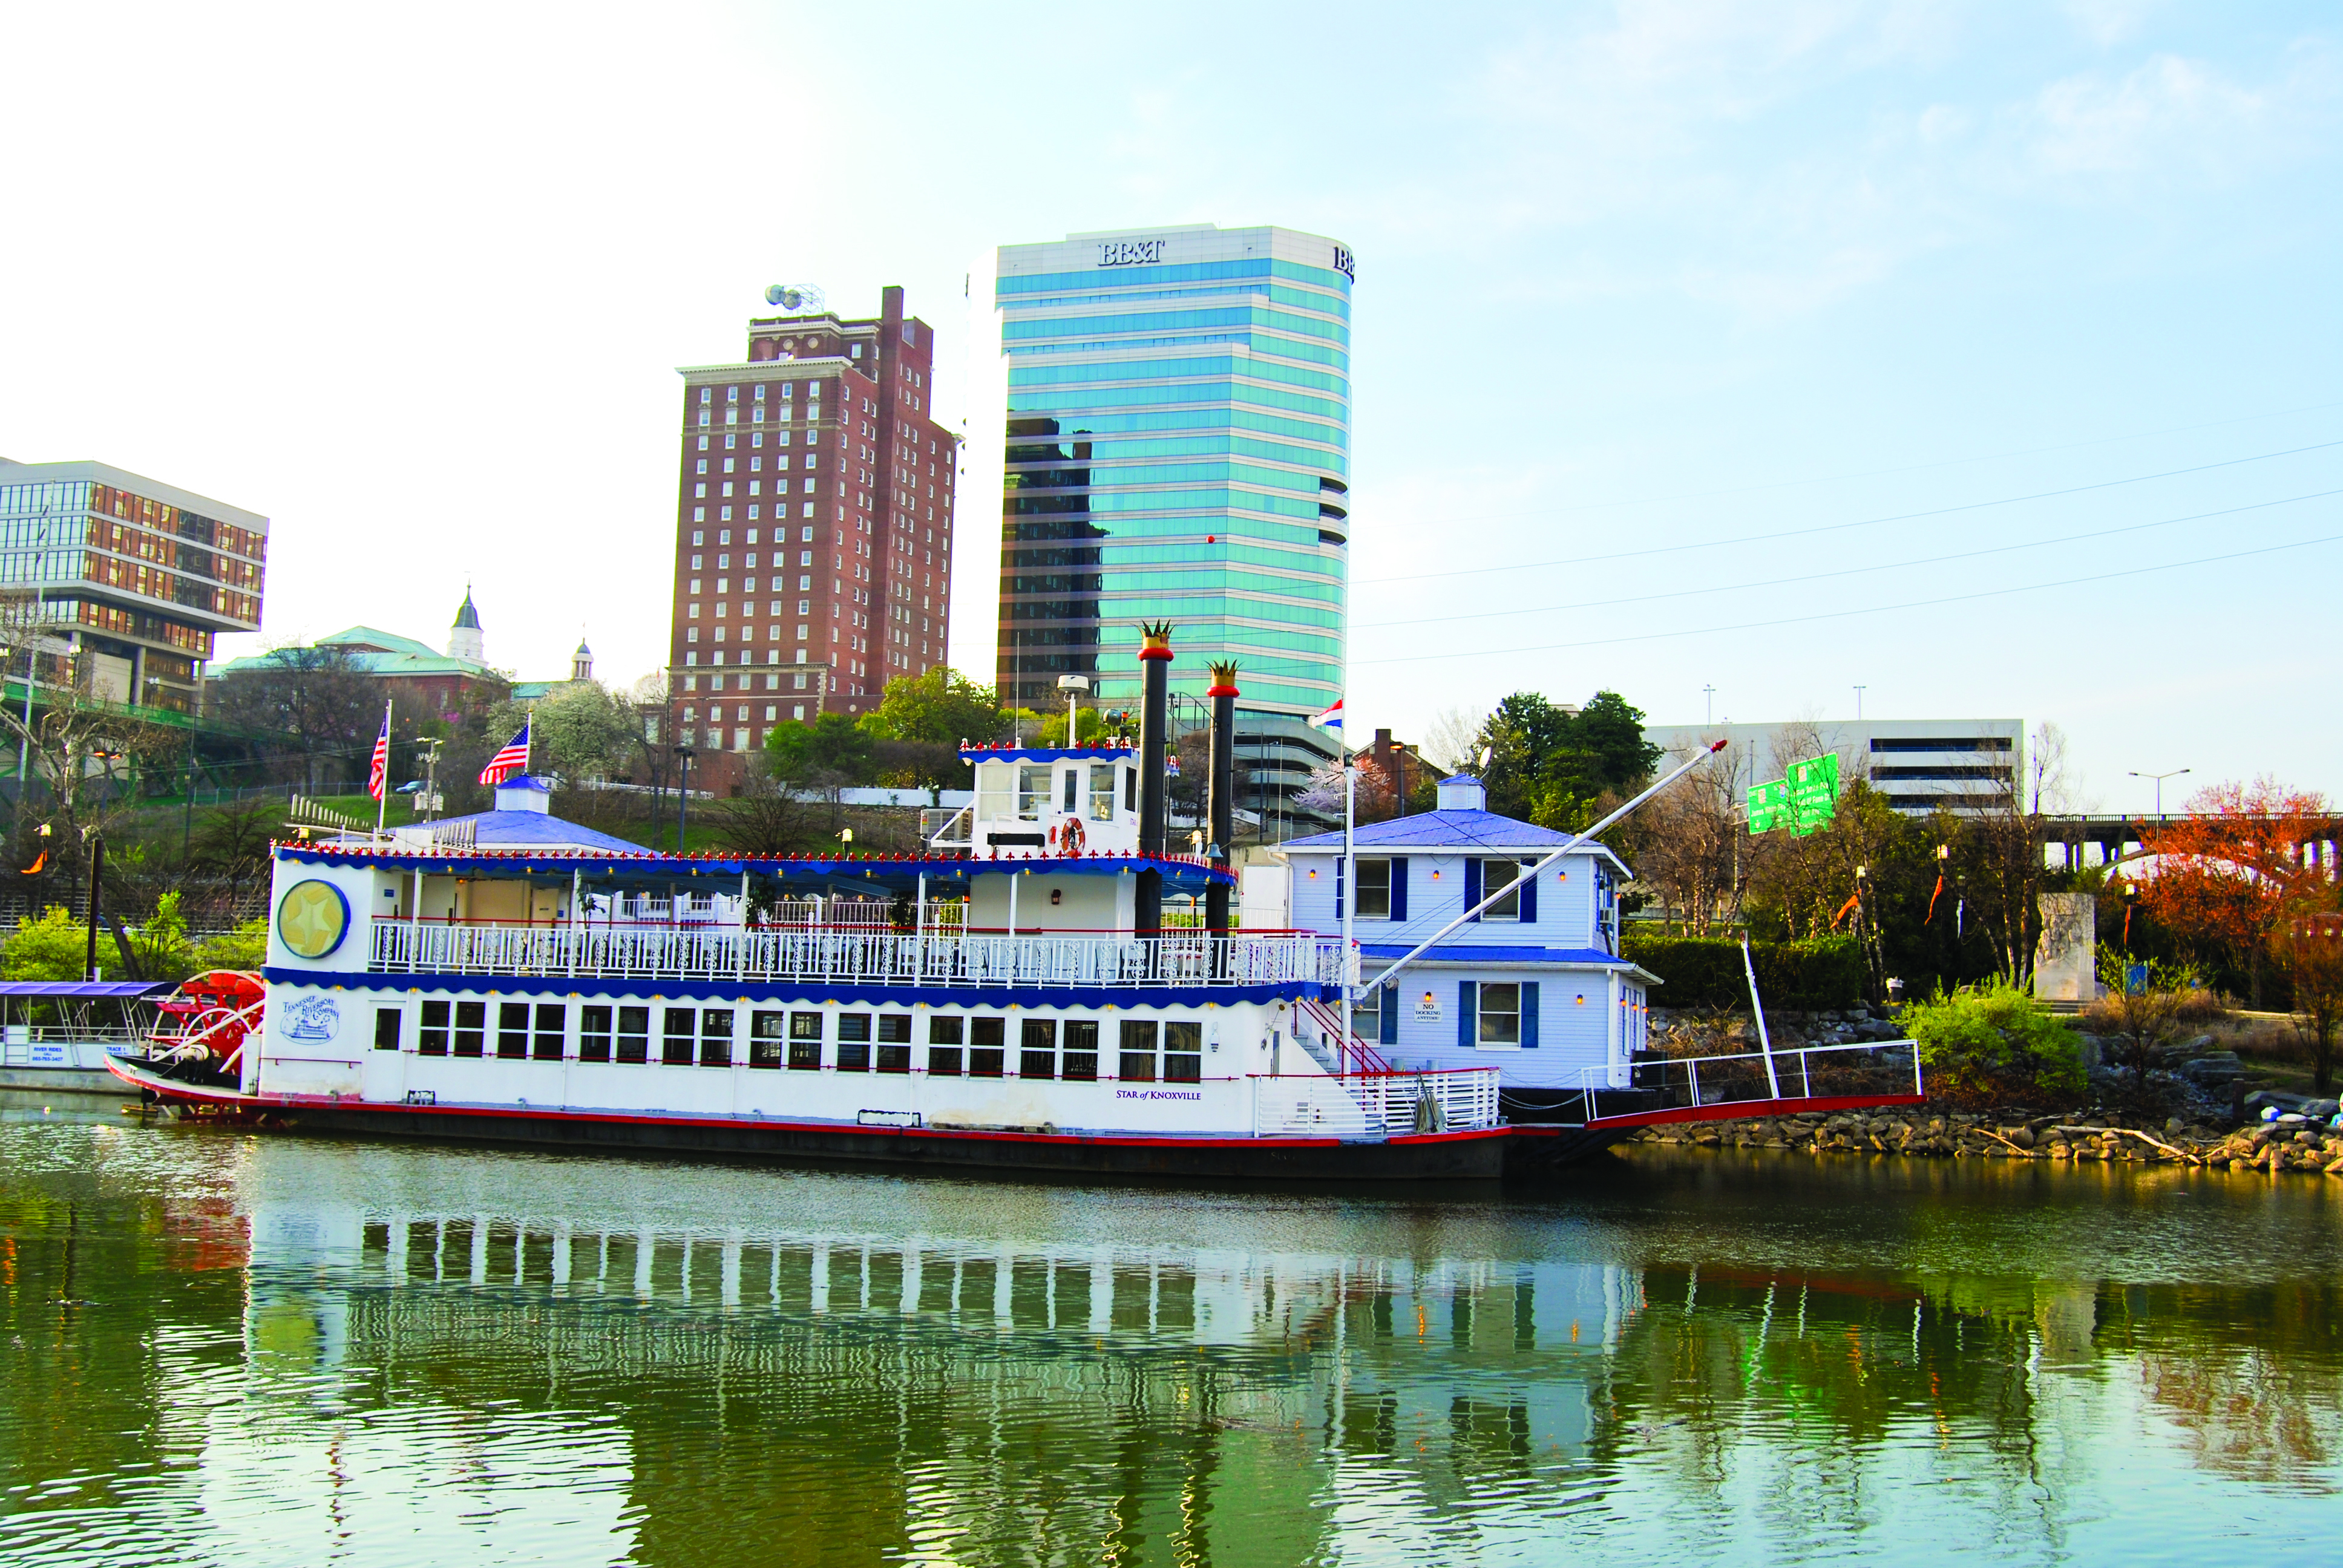 The Star of Knoxville provides a highlight for the Tennessee city situated by a river.